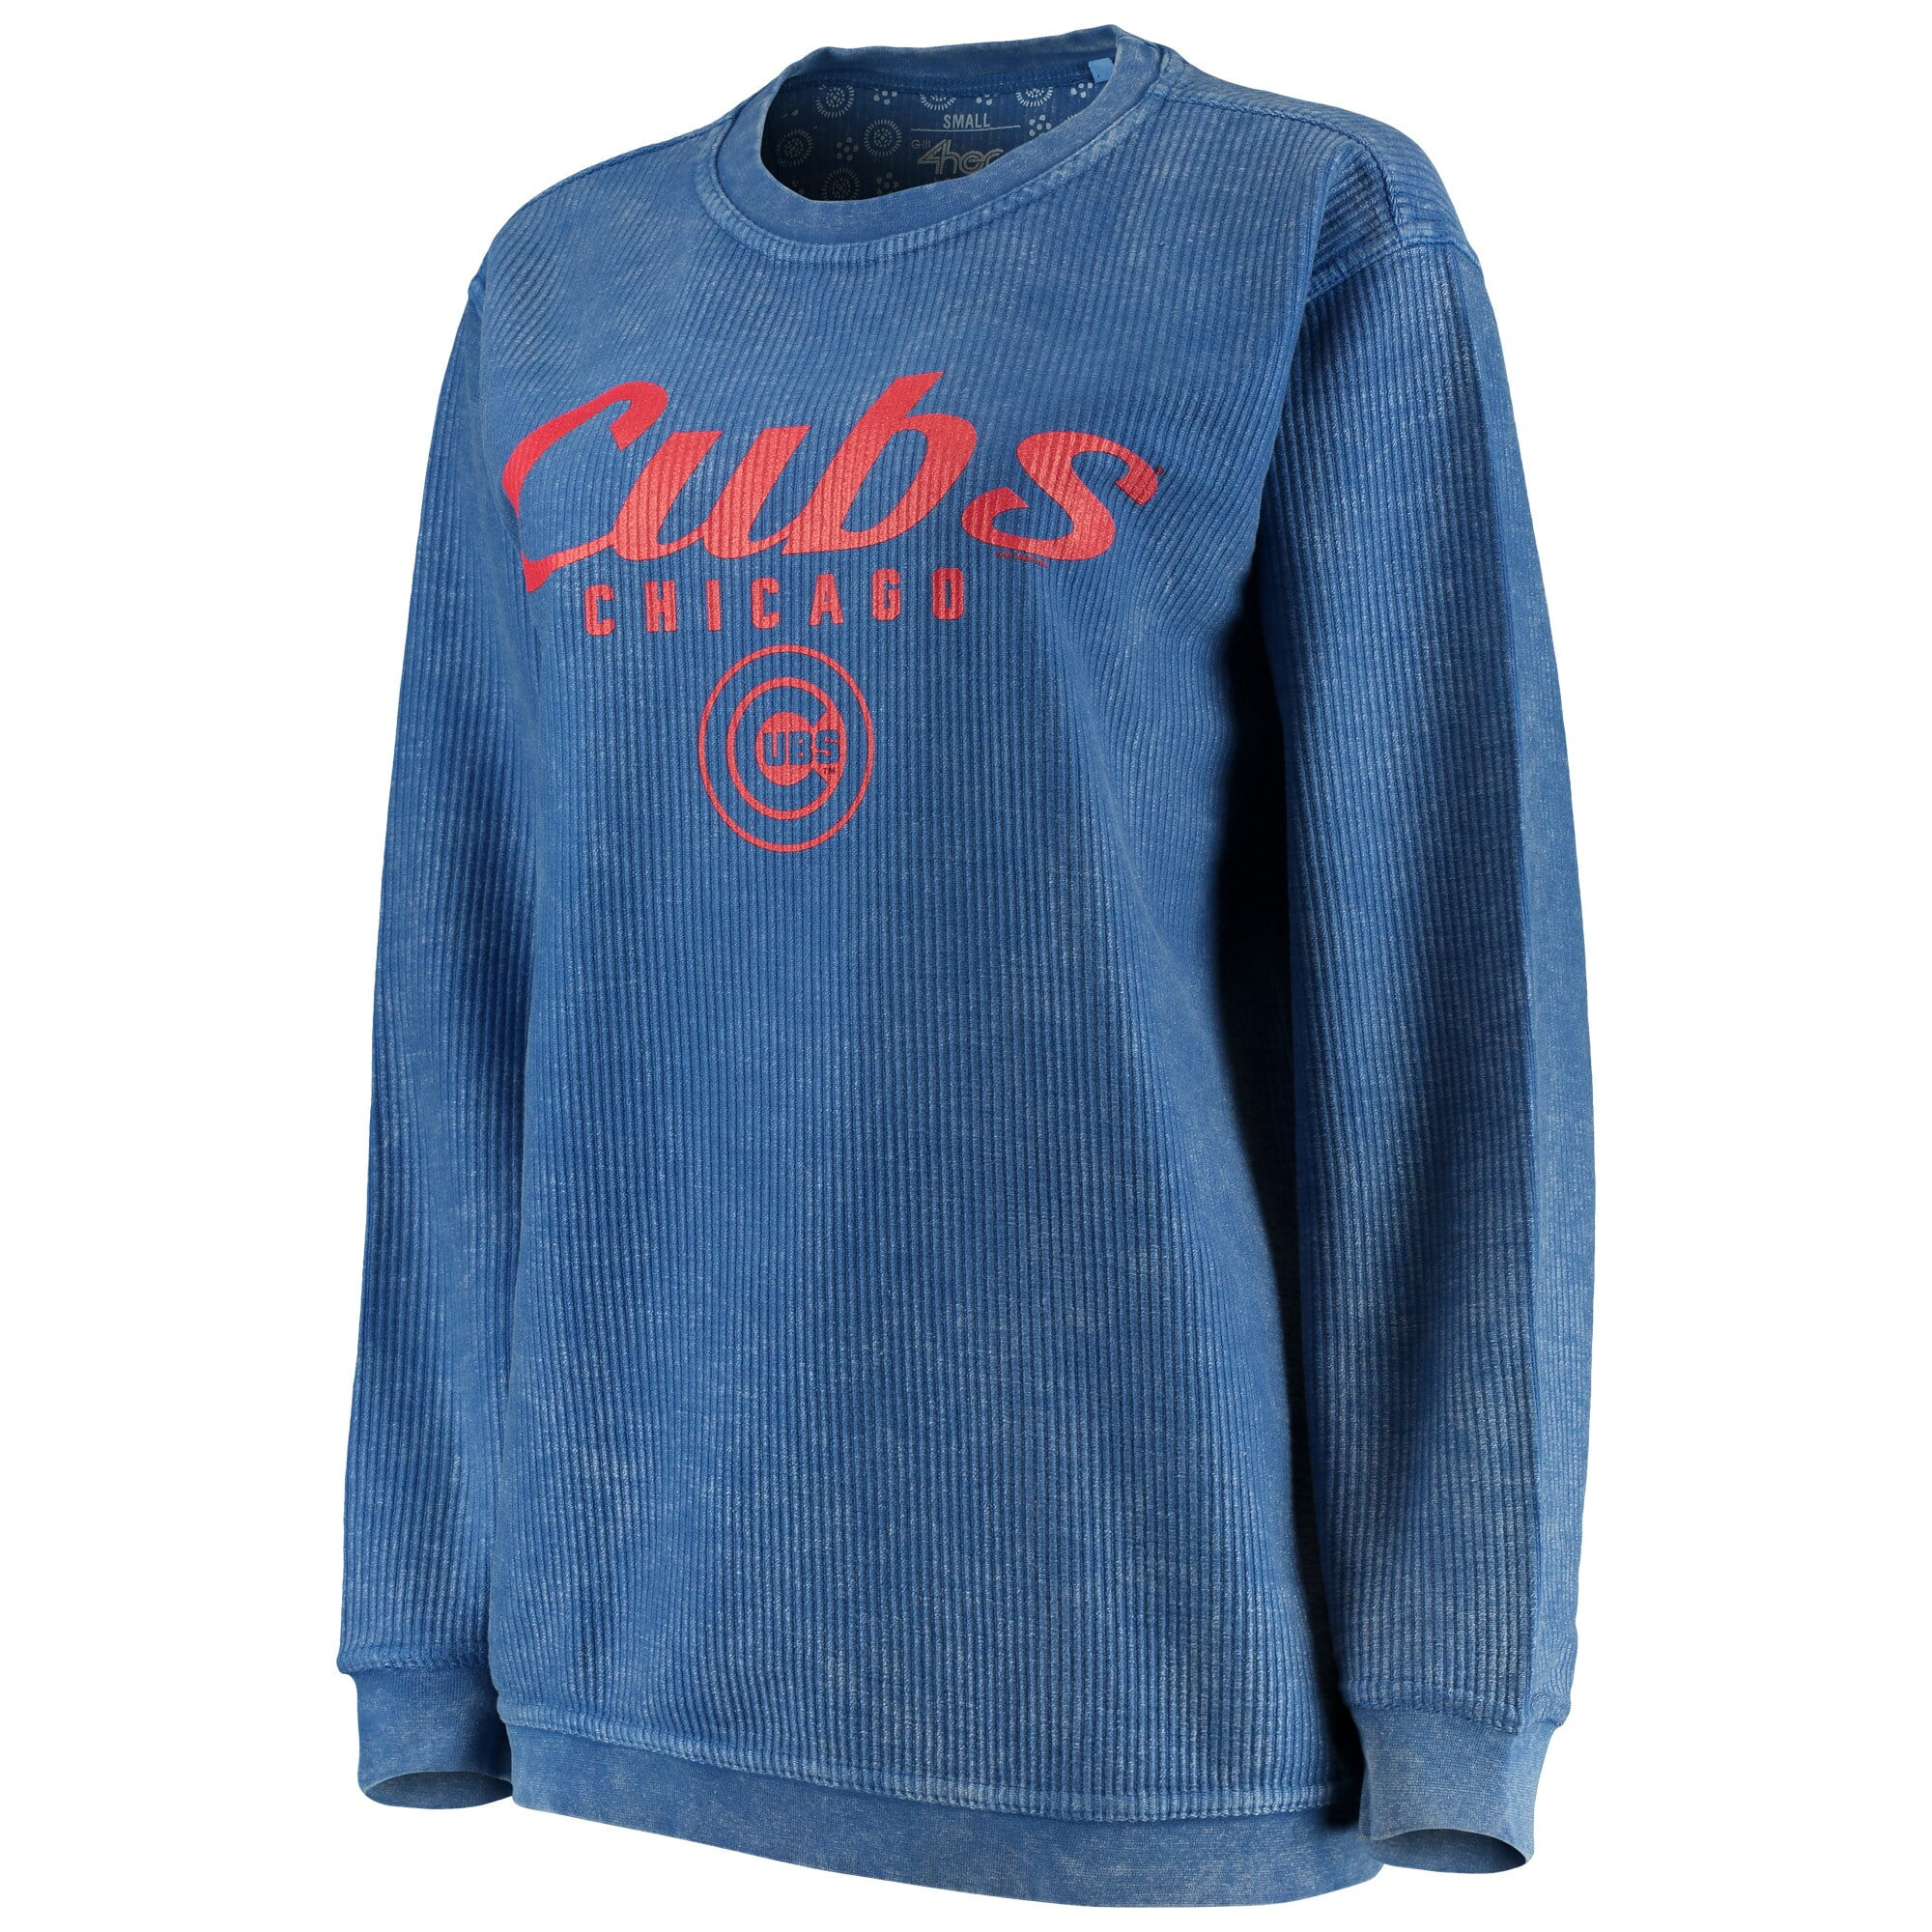 Chicago Cubs G-III 4Her by Carl Banks Women's Team Graphic V-Neck